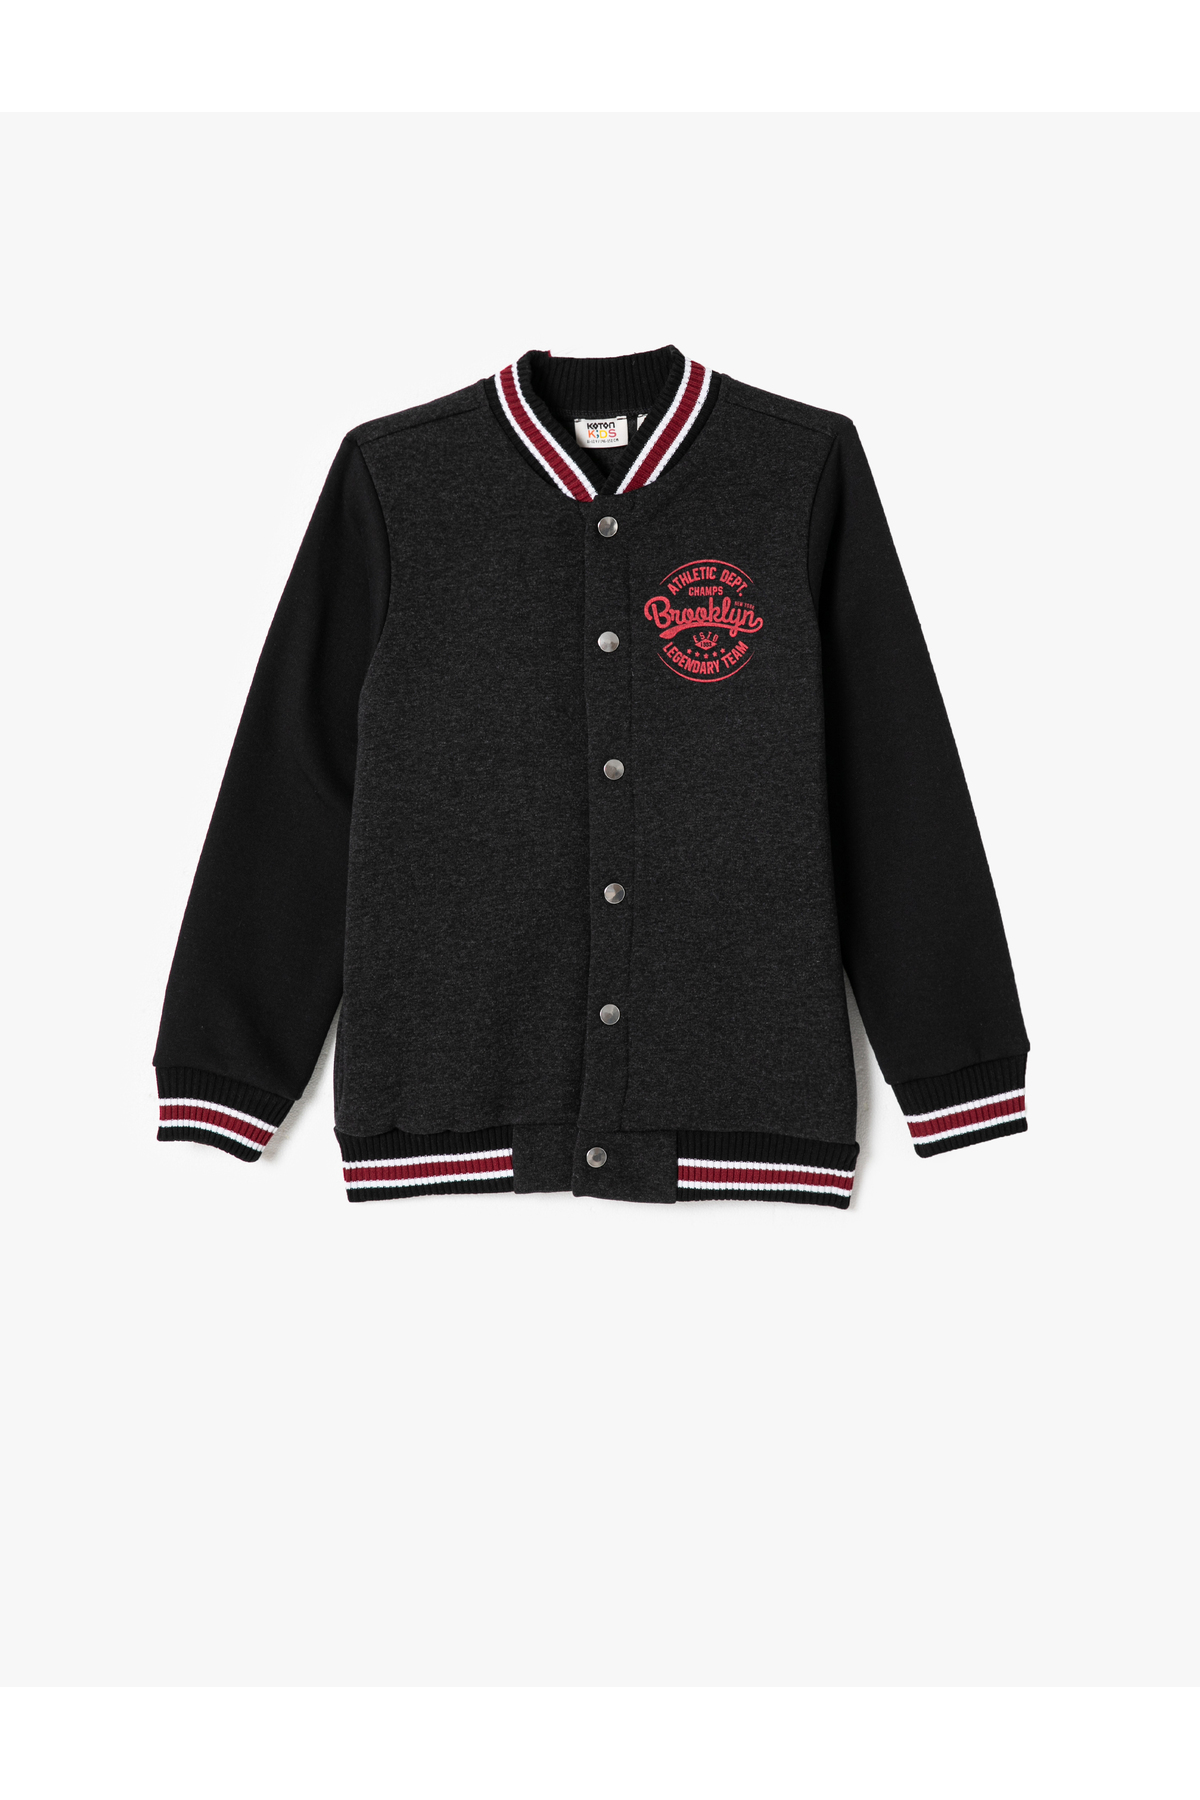 Koton College Jacket with Snap Buttons Printed